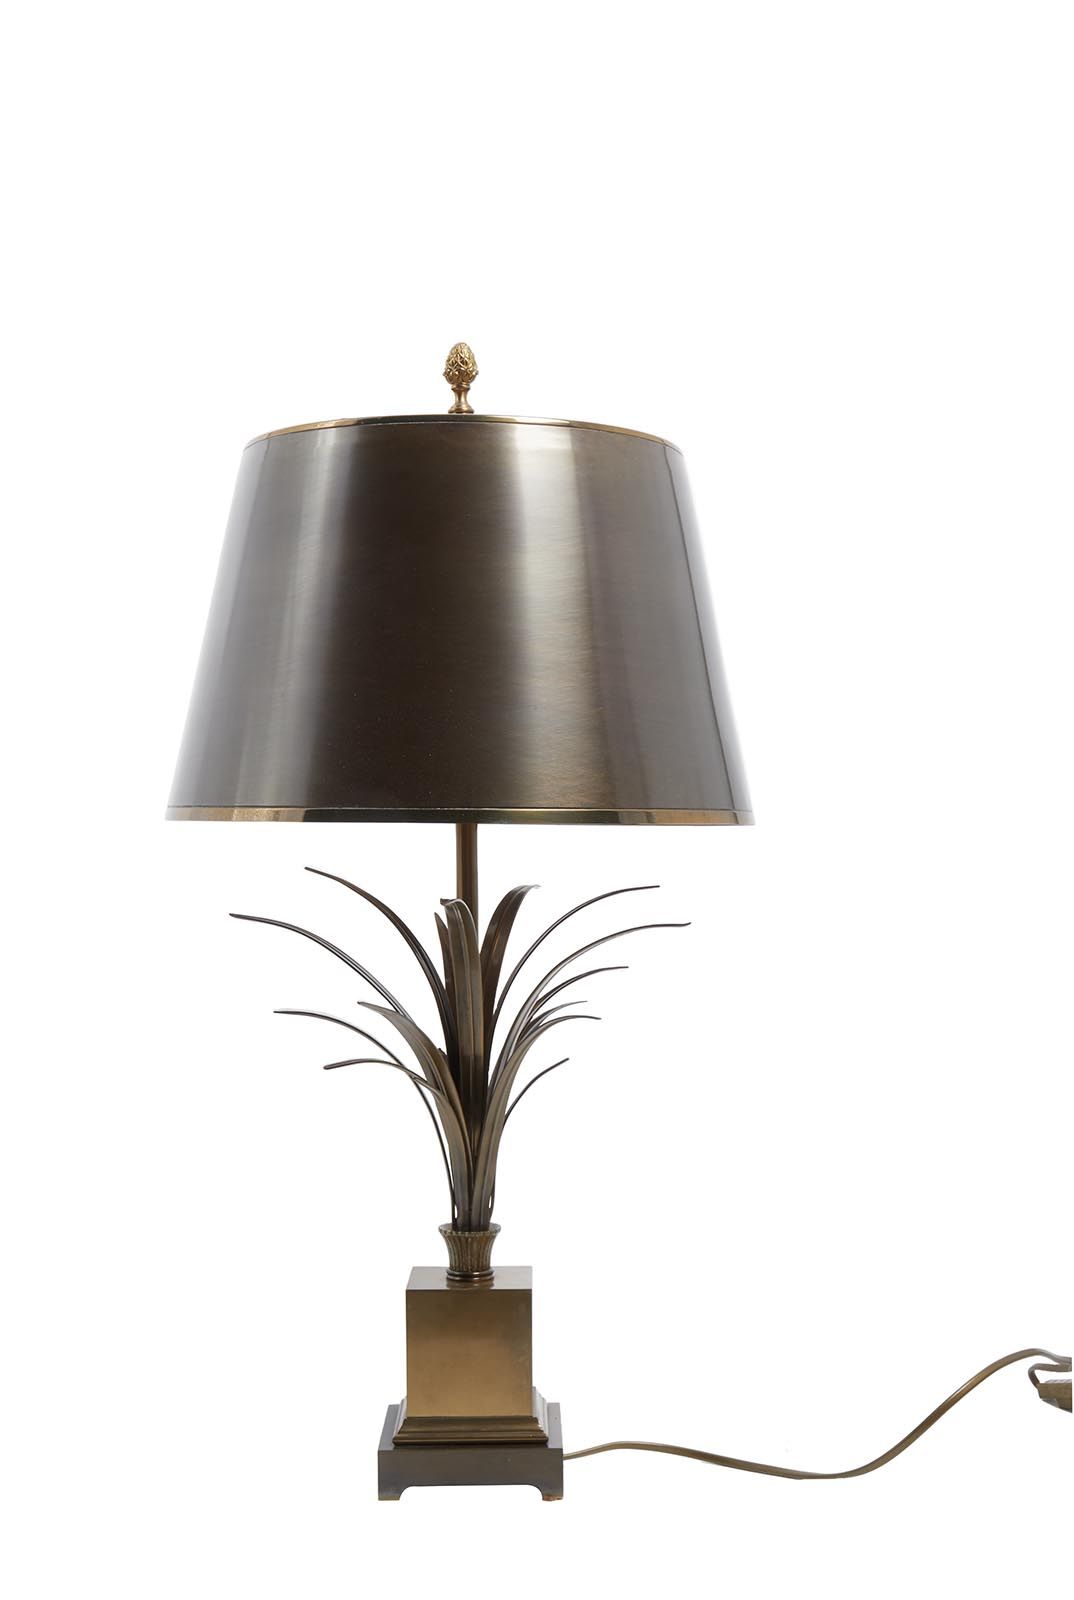 Null 368 Maison Charles; lamp ear of wheat in bronze and brass.
H : 63 cm